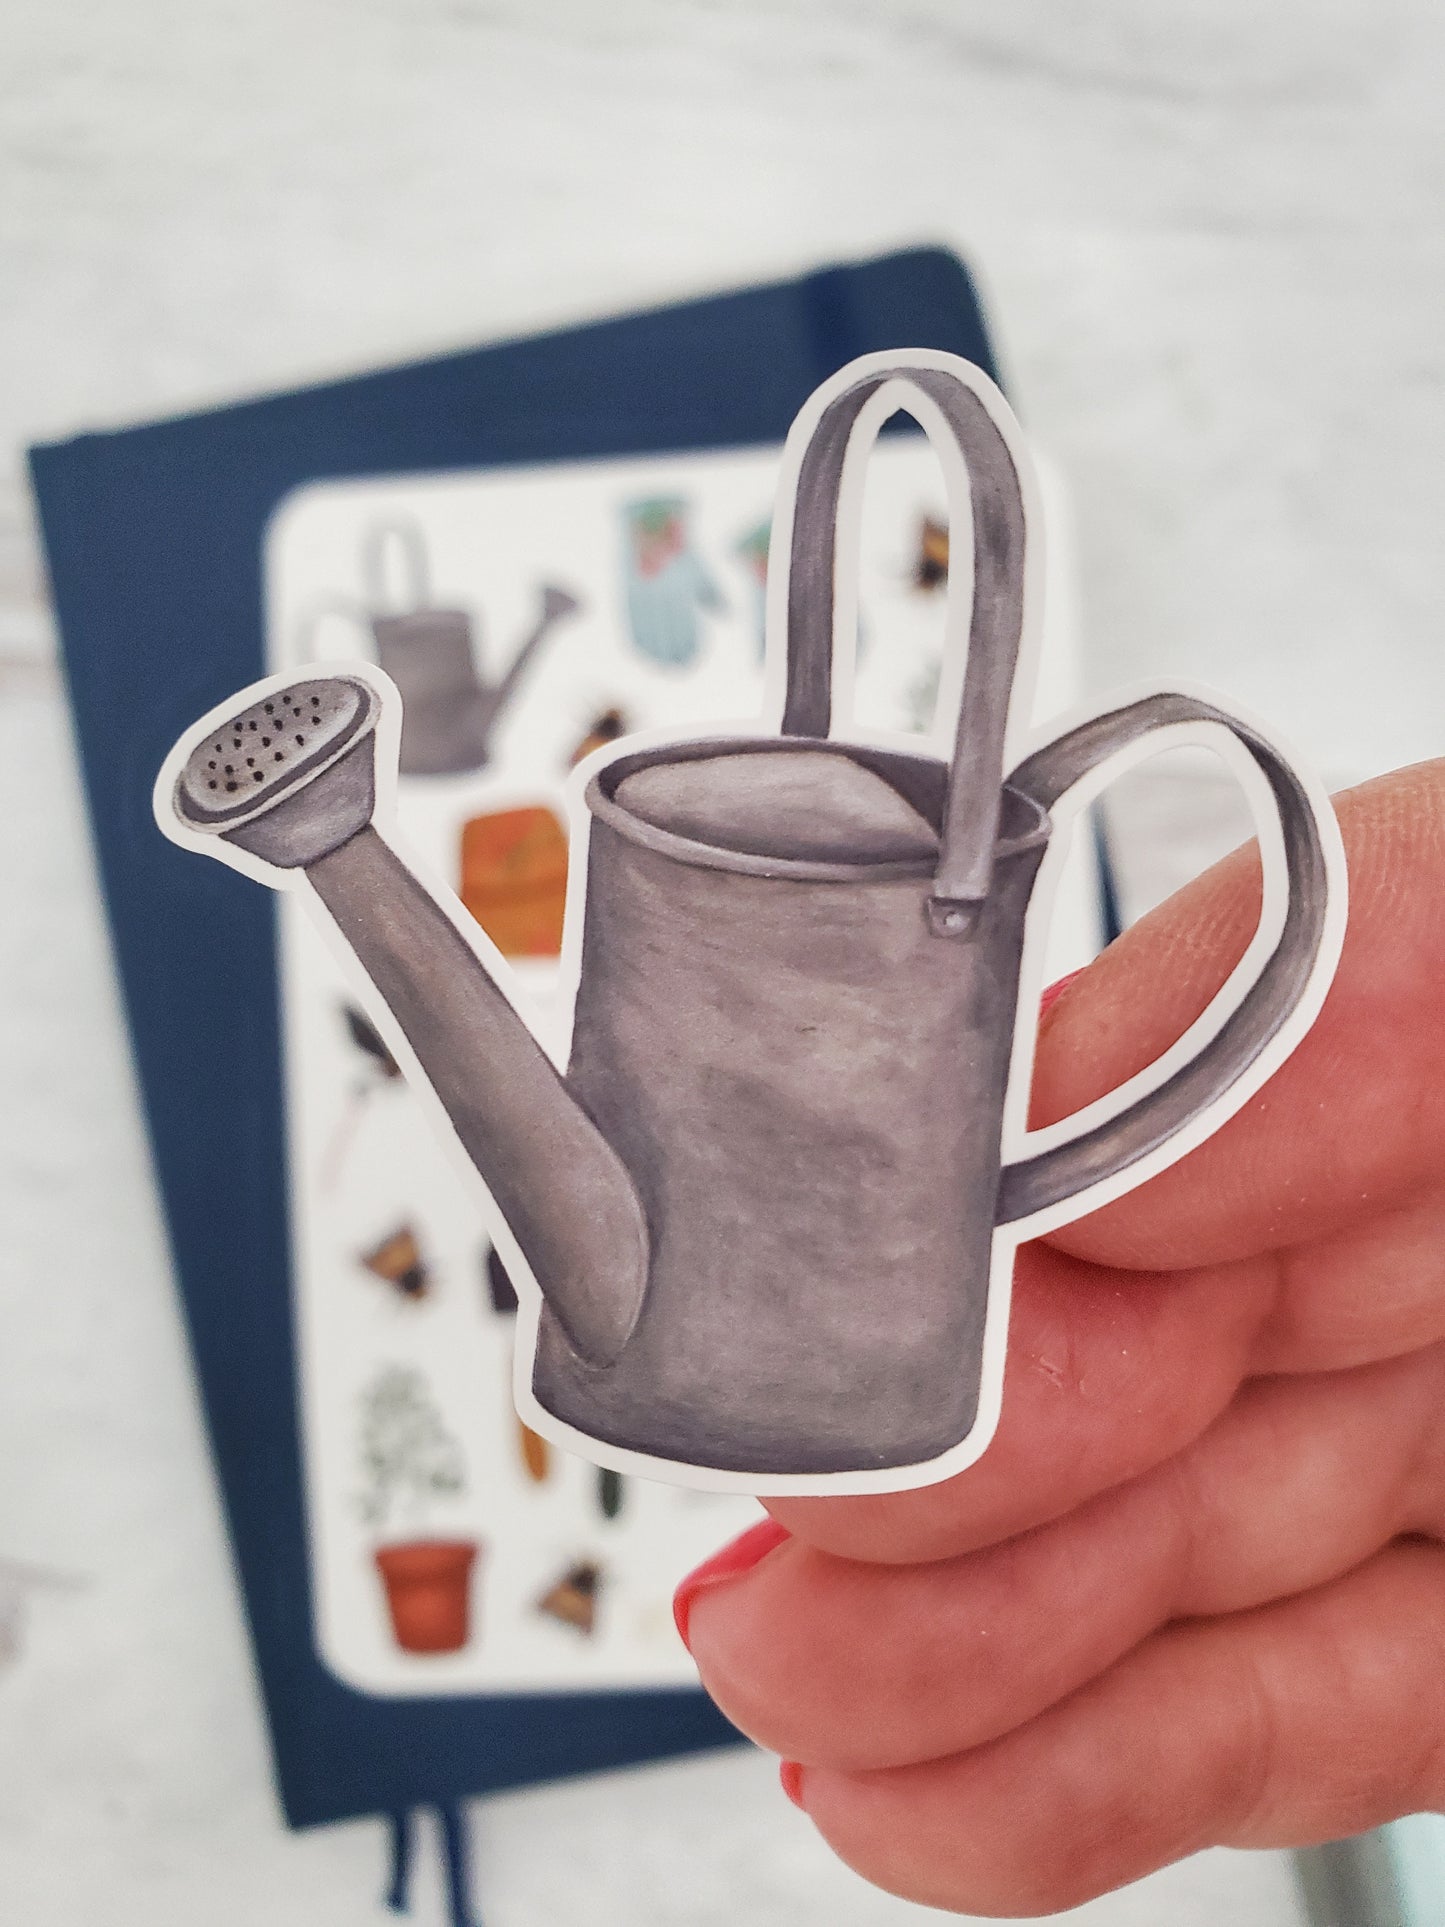 A close up of the watering can sticker. The can is the galvanized metal kind.